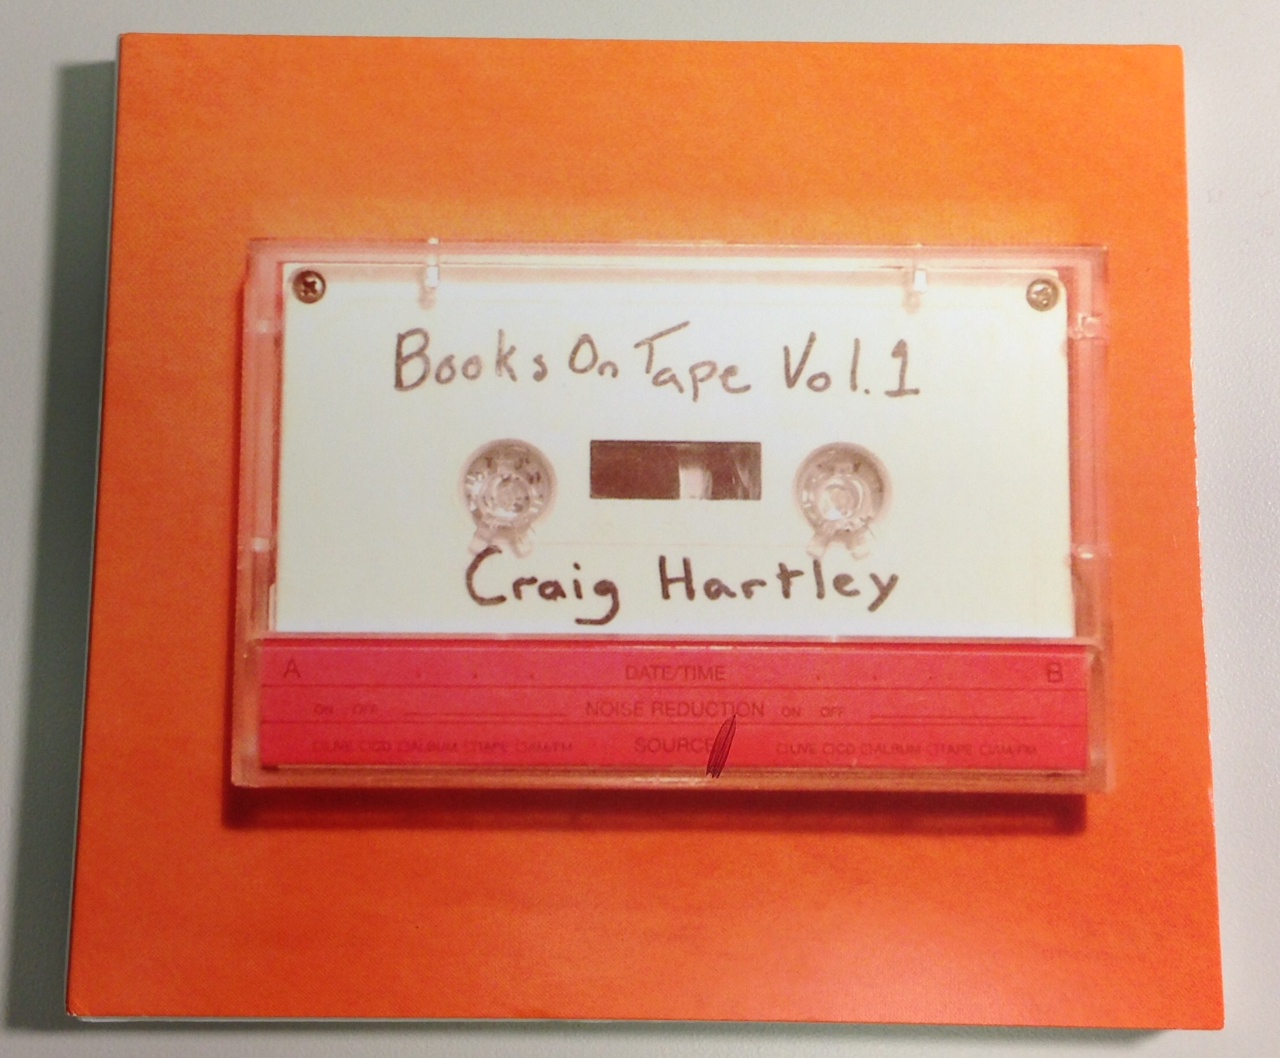 Craig Hartley - Books on Tape Vol. 1 CD Review